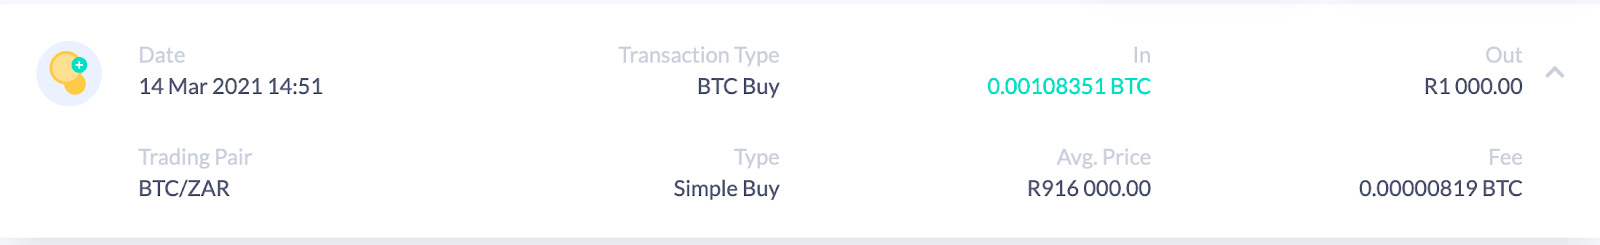 Screenshot of BTC purchase order from Valr. 